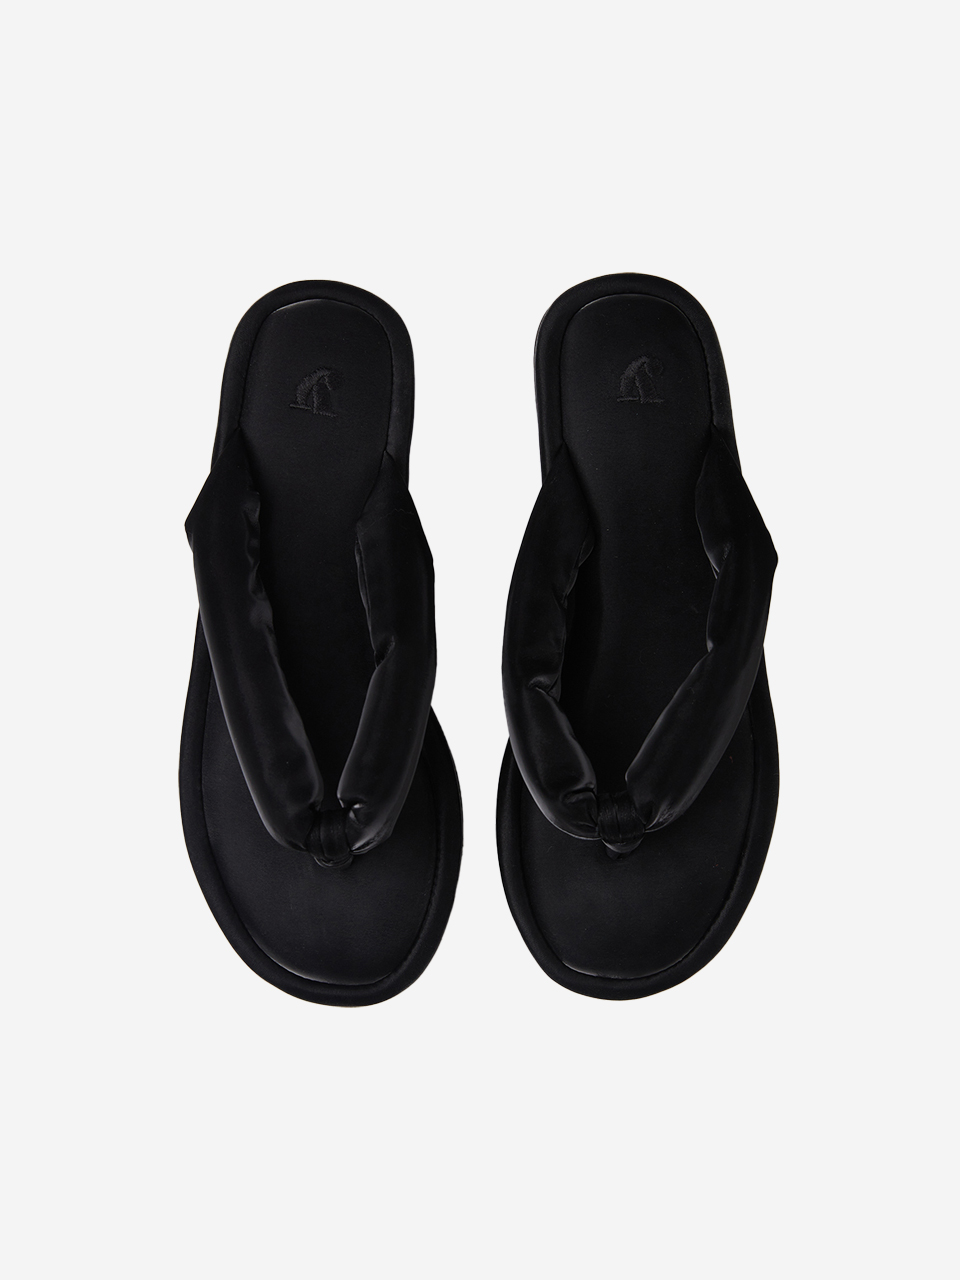 easygoing slippers (scotch black)